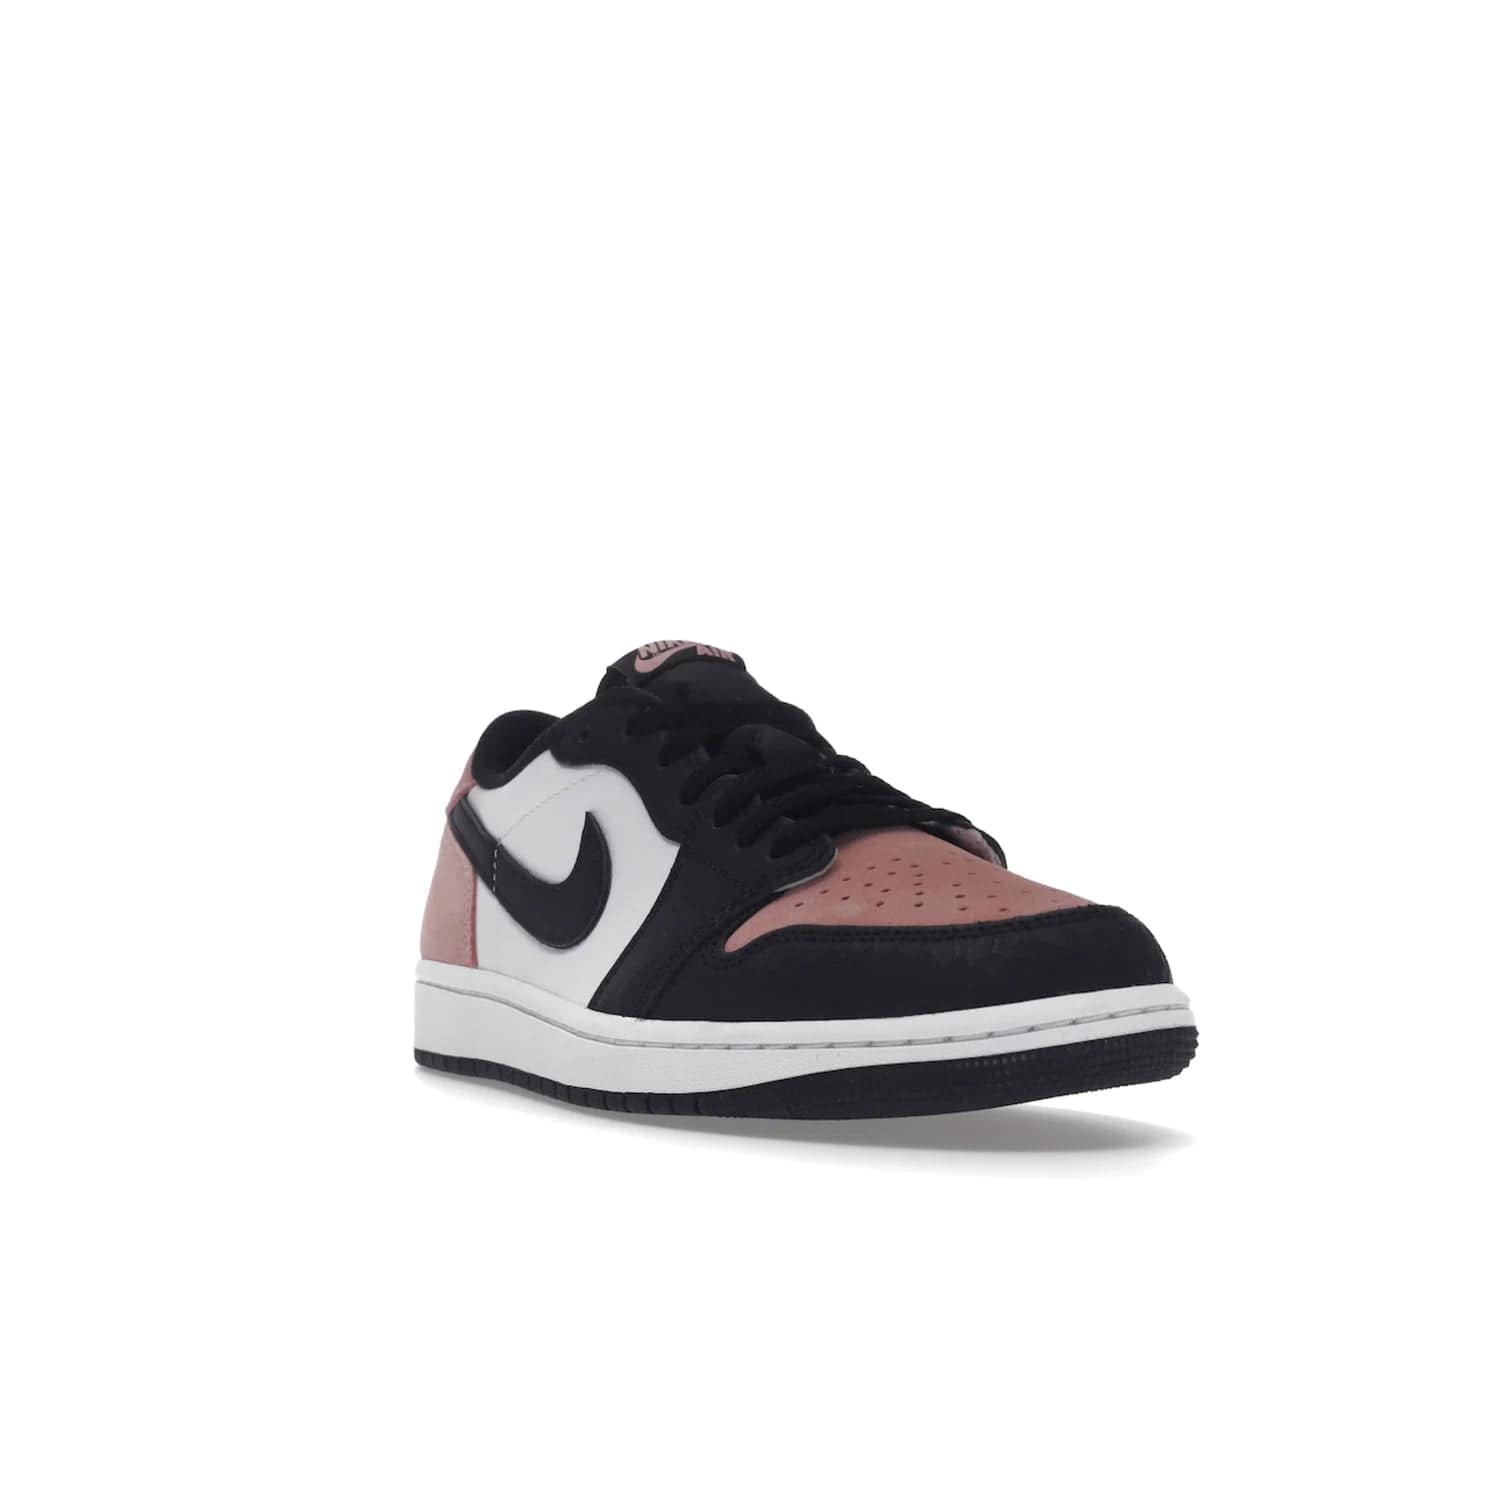 Jordan 1 Low OG Bleached Coral - Image 7 - Only at www.BallersClubKickz.com - Introducing the Air Jordan 1 Low OG Bleached Coral. Constructed with white leather, black cracked leather & Bleached Coral suede. Signature Jordan Wings logo, white Air sole. Get the pack in July 2022 and stand out.